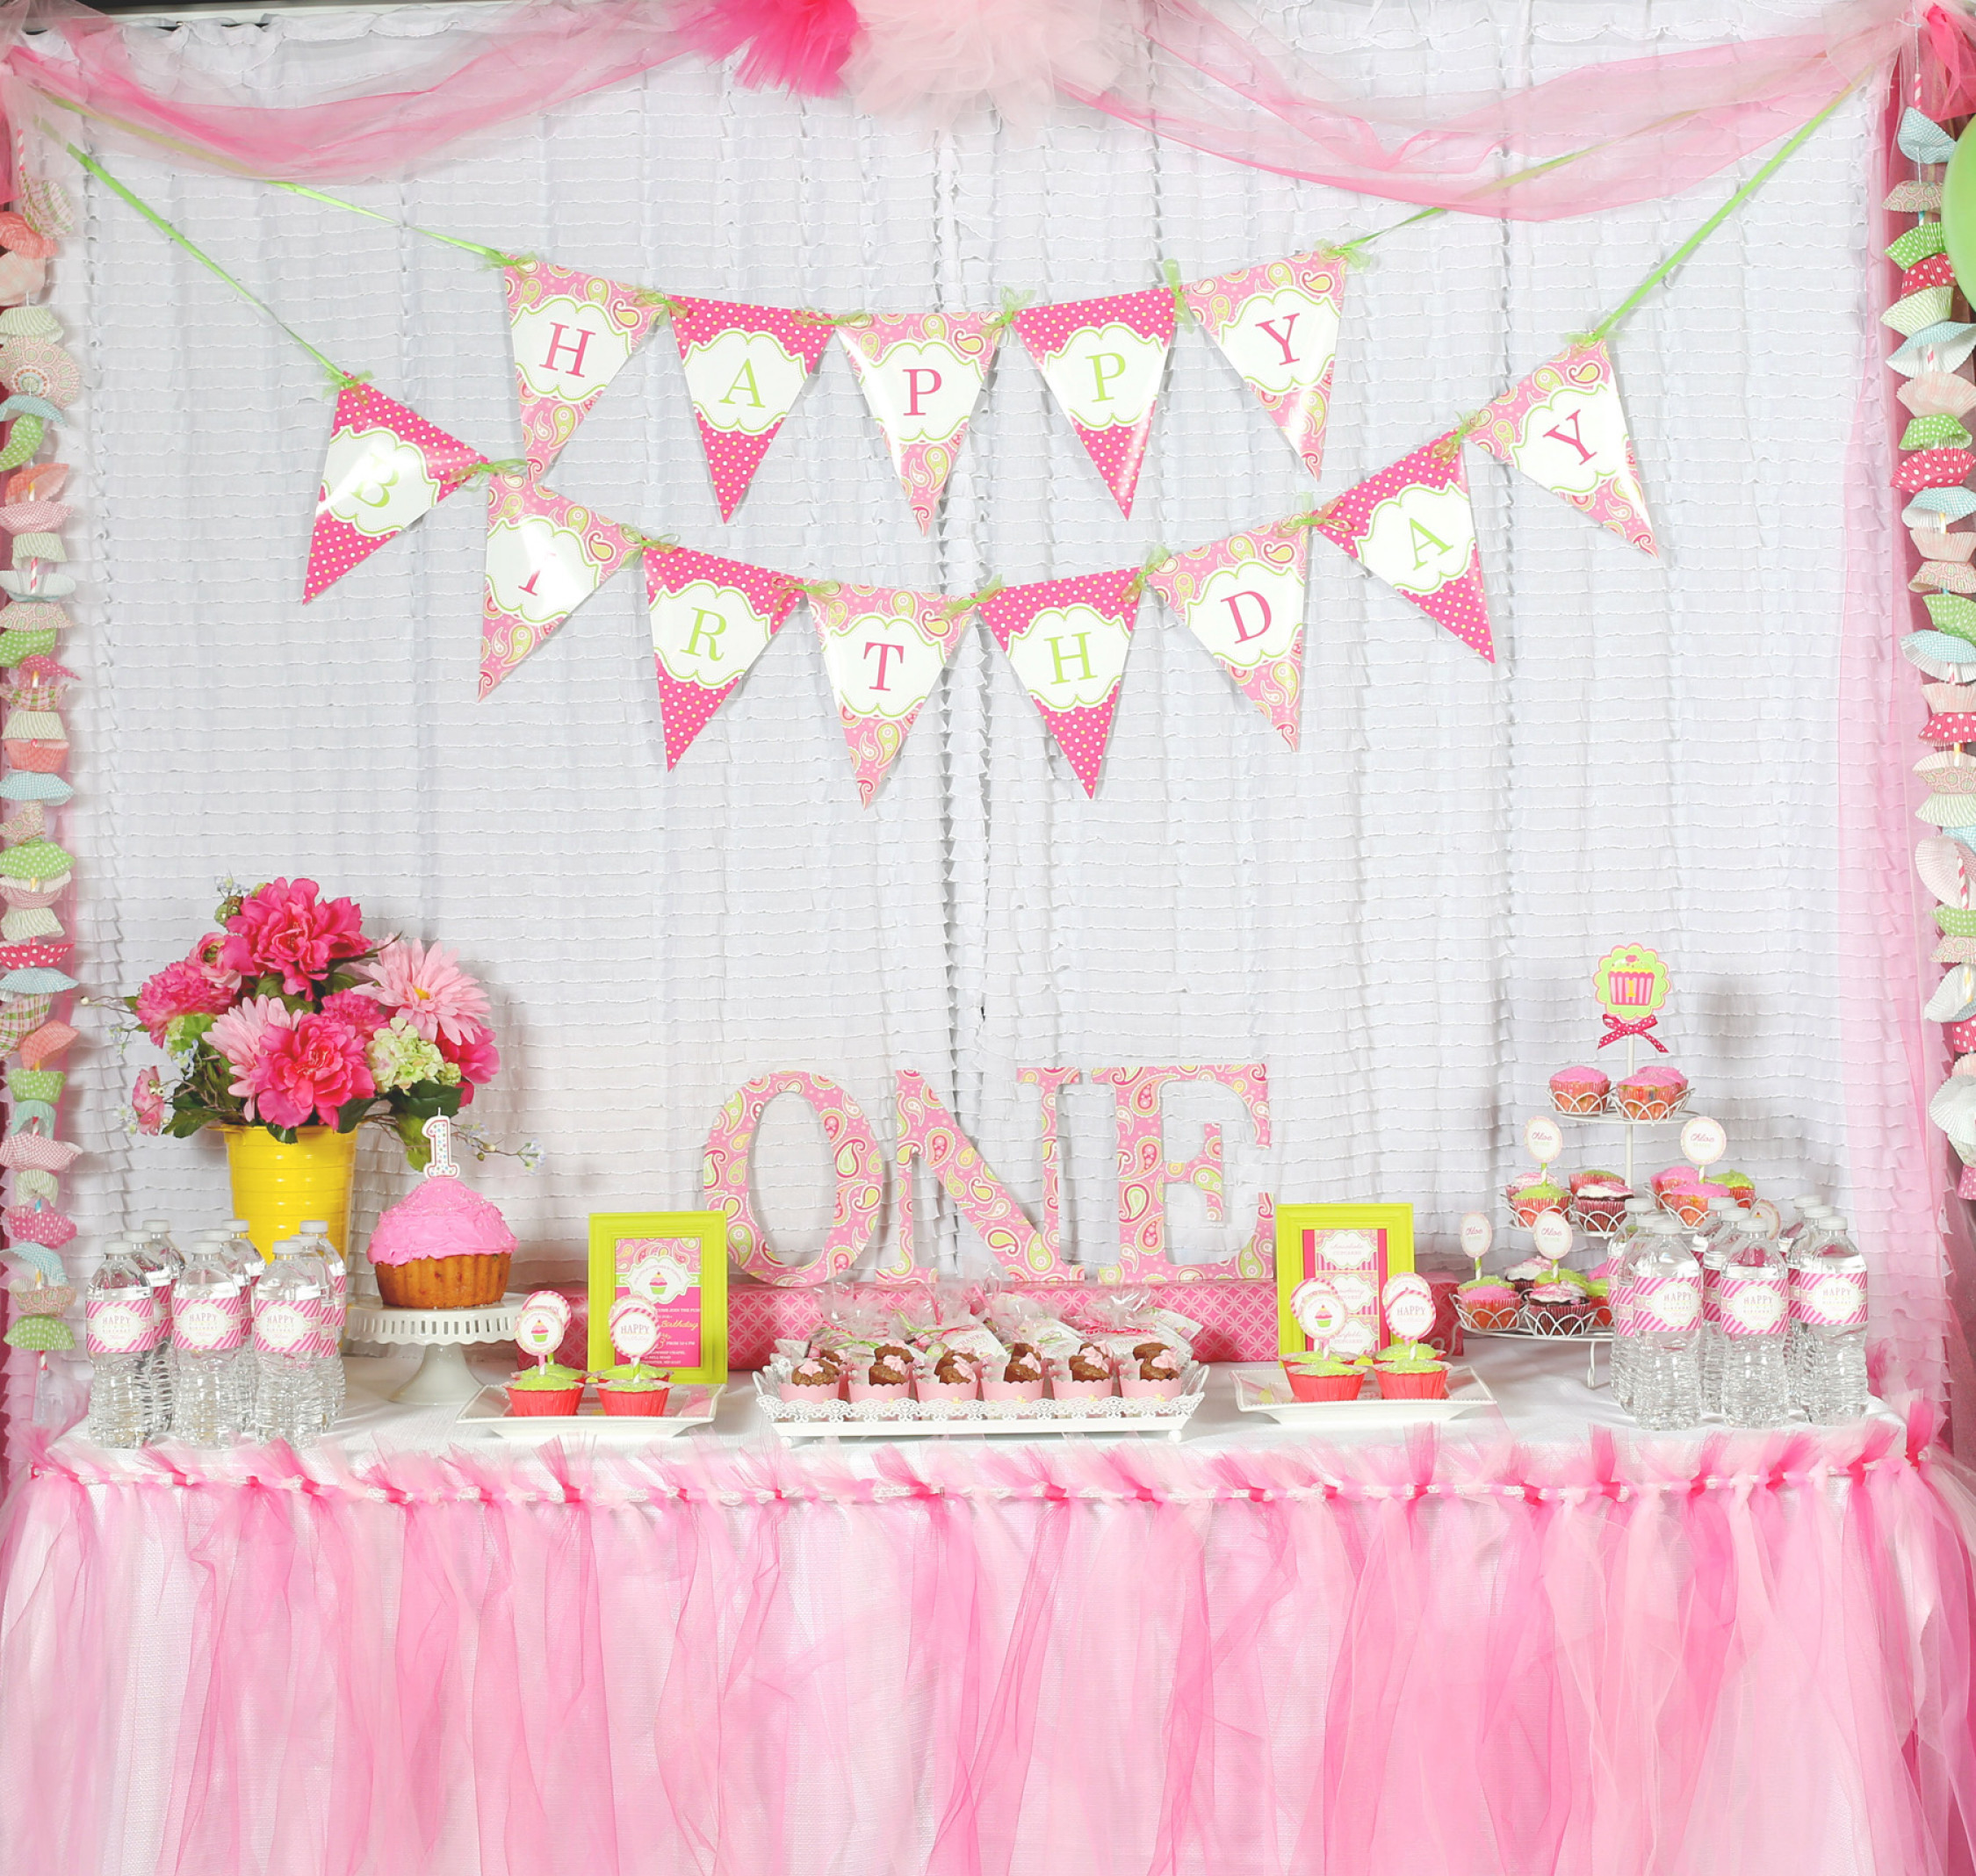 Girls First Birthday Party Ideas
 A Cupcake Themed 1st Birthday party with Paisley and Polka